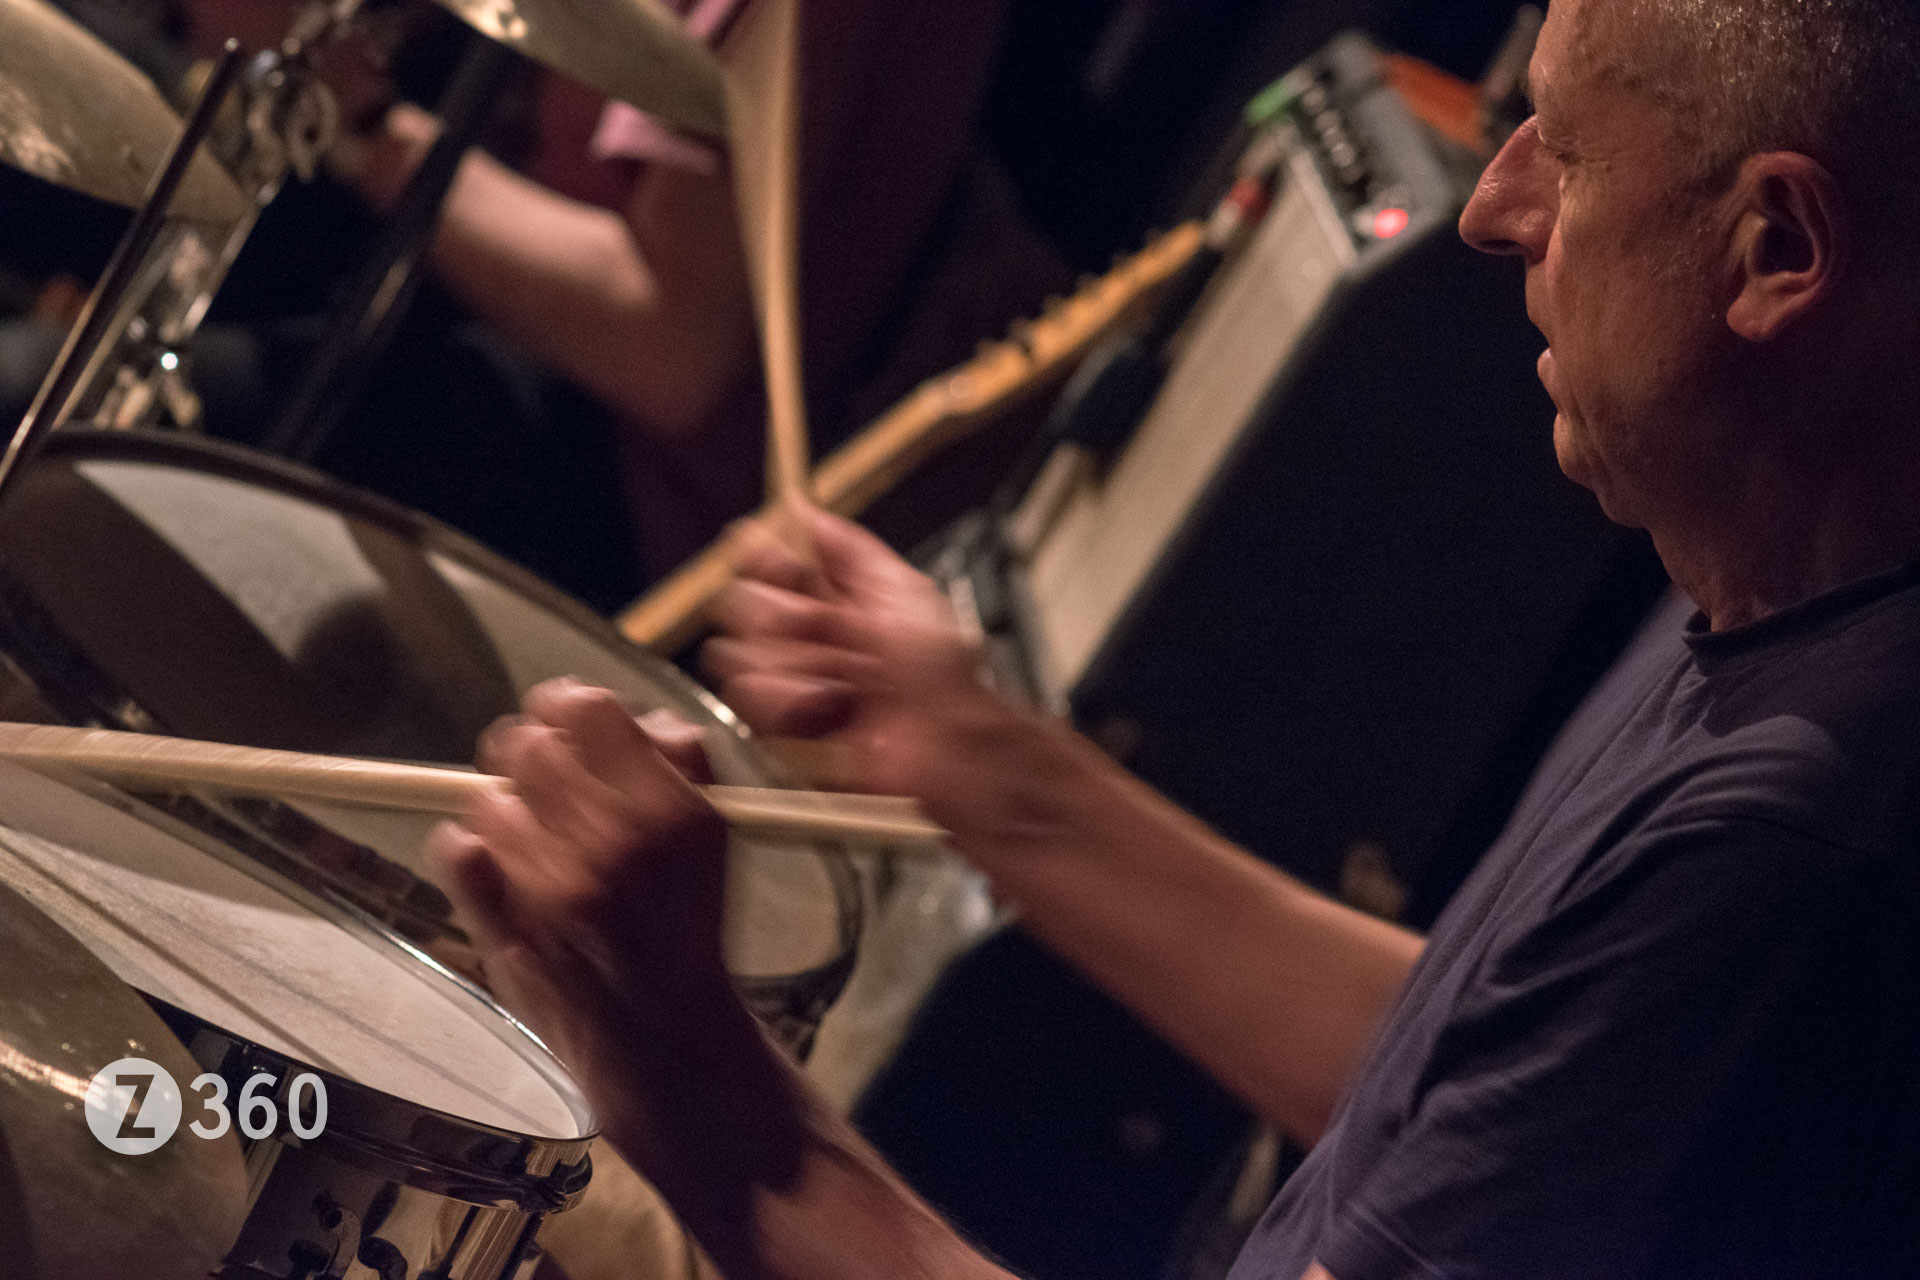 The Founder Effect at Cafe Oto 22/04/18